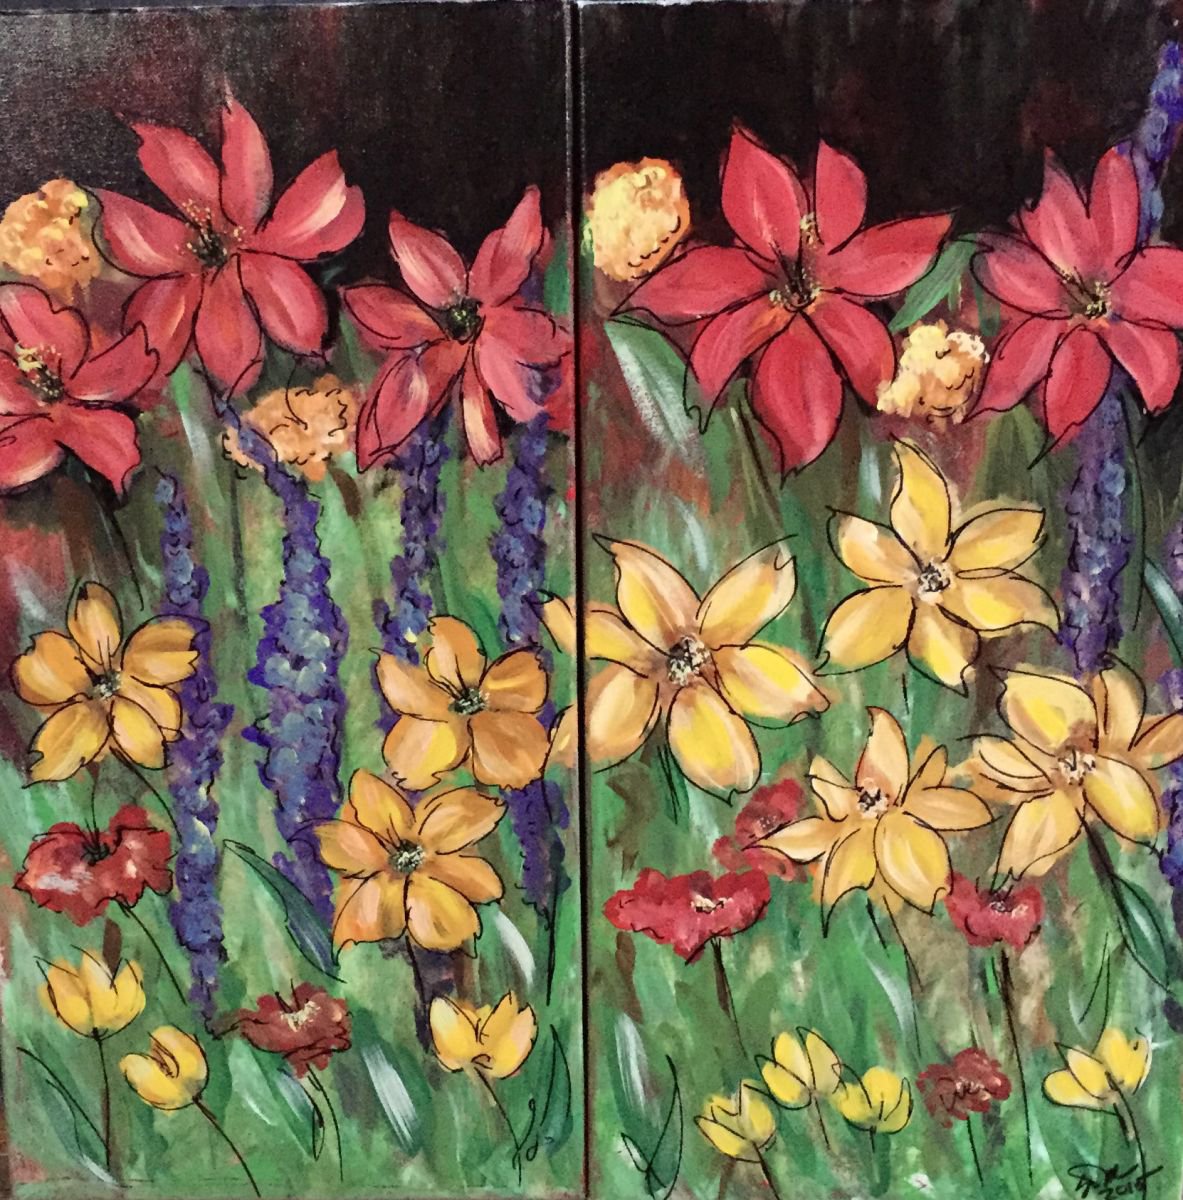 Spring flowers by Carolyn Shoemaker (Soma)